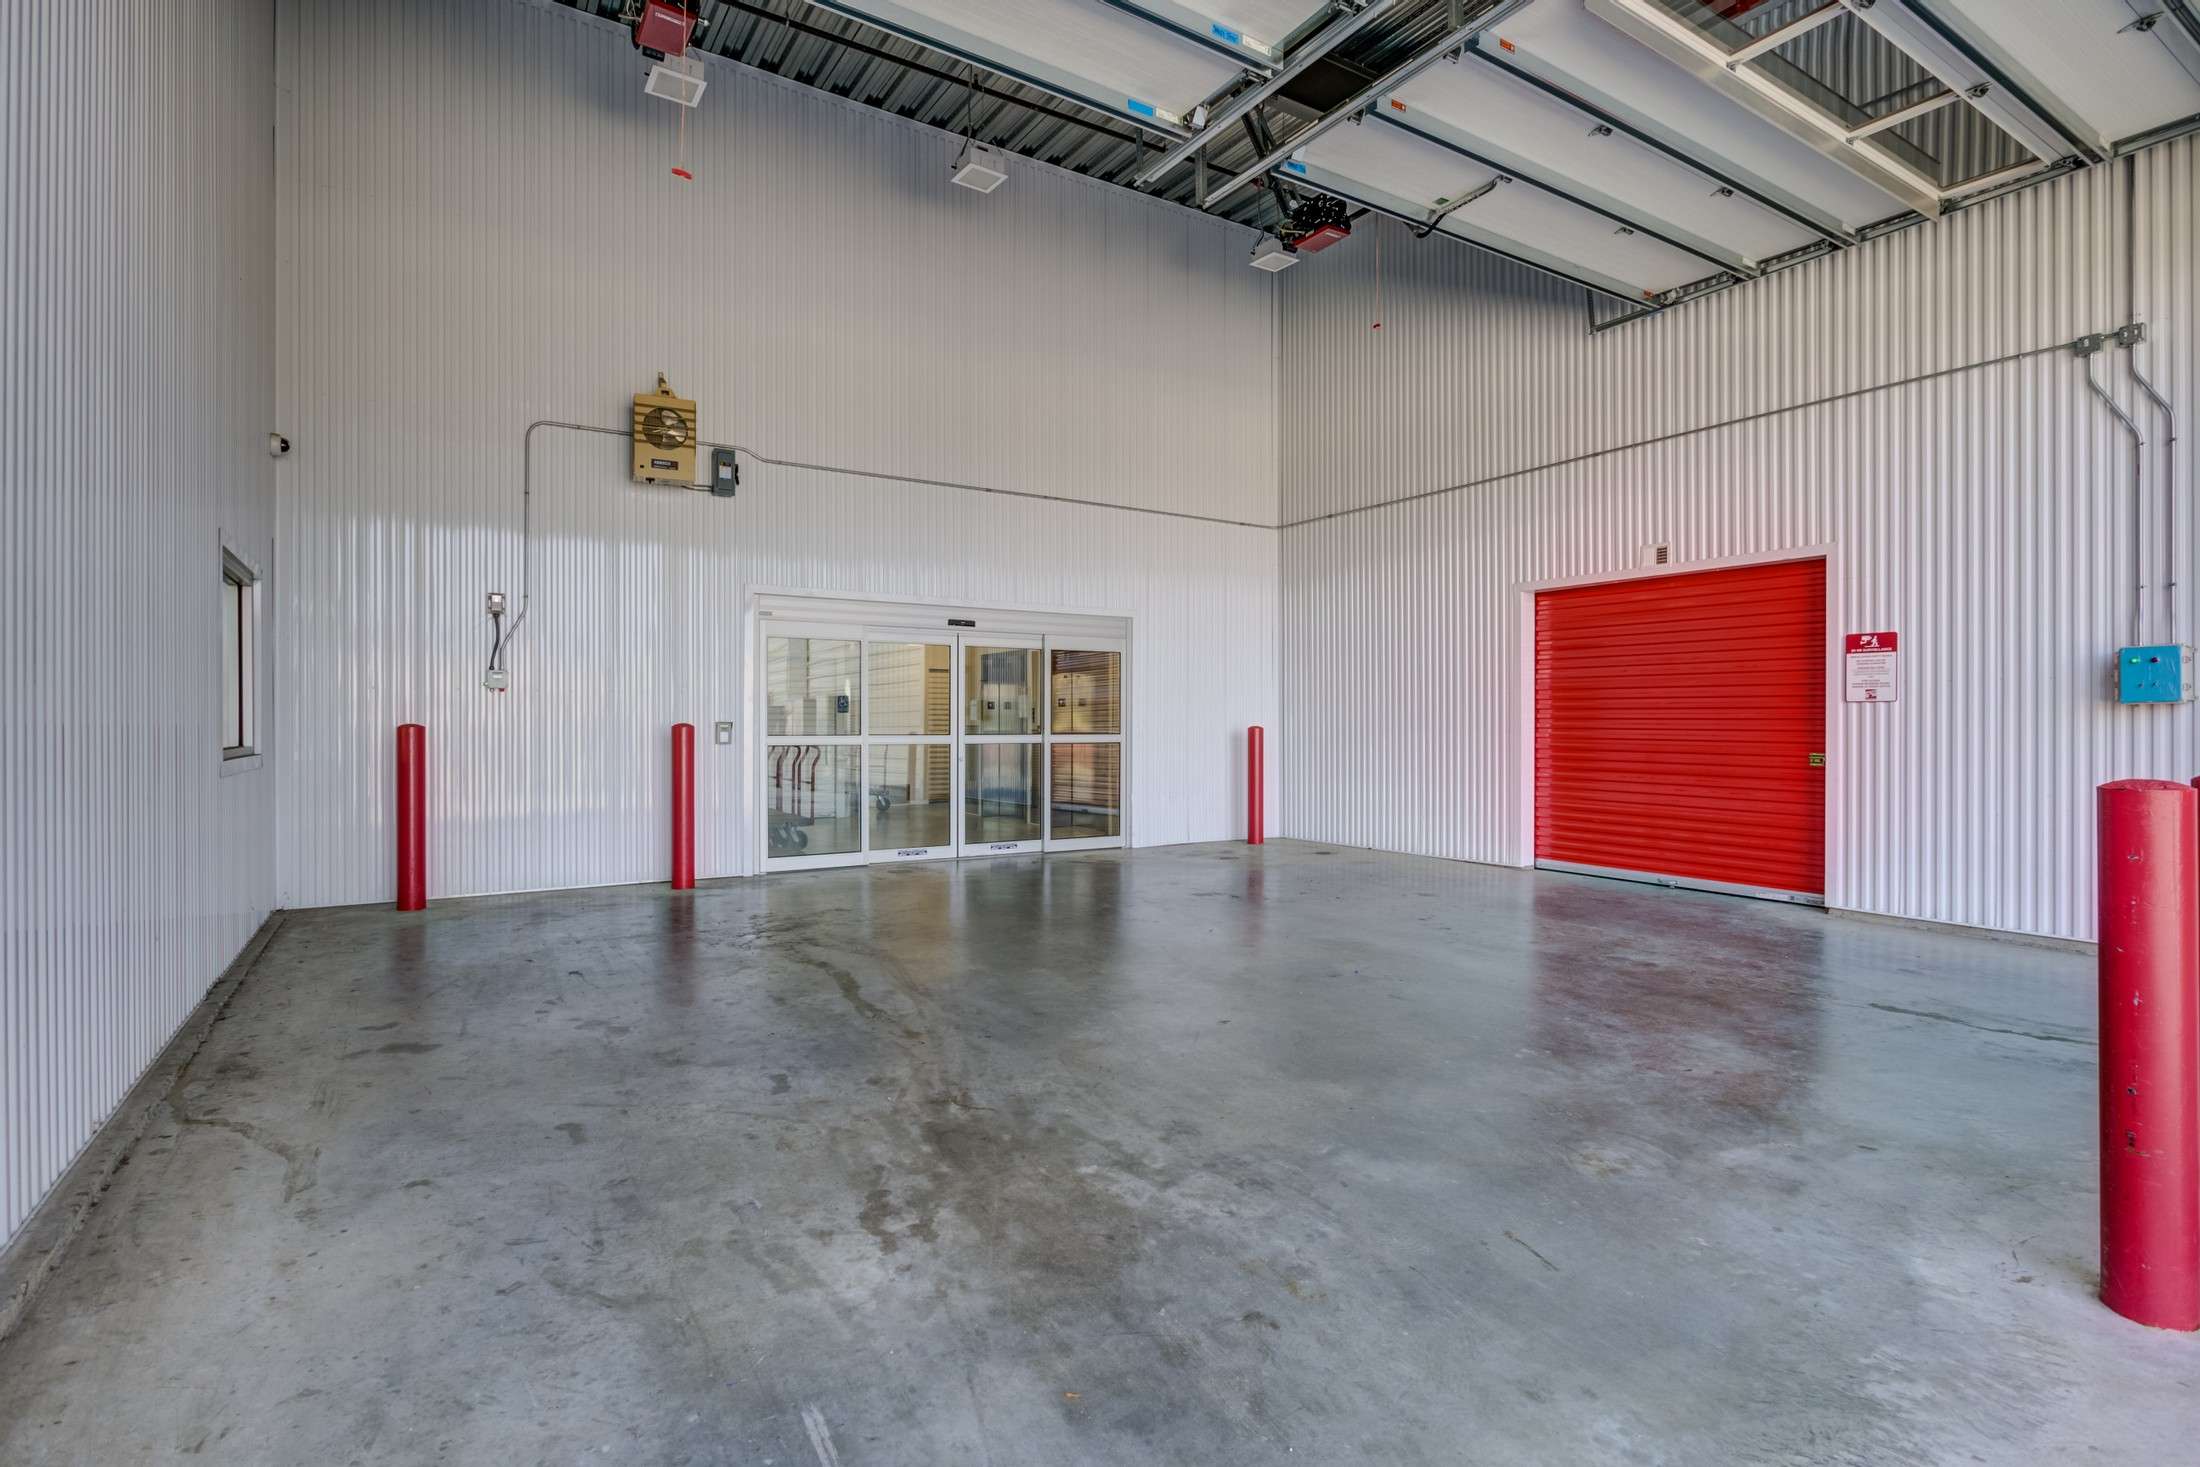 Top 30 Storage Units in New Orleans, LA, from $16